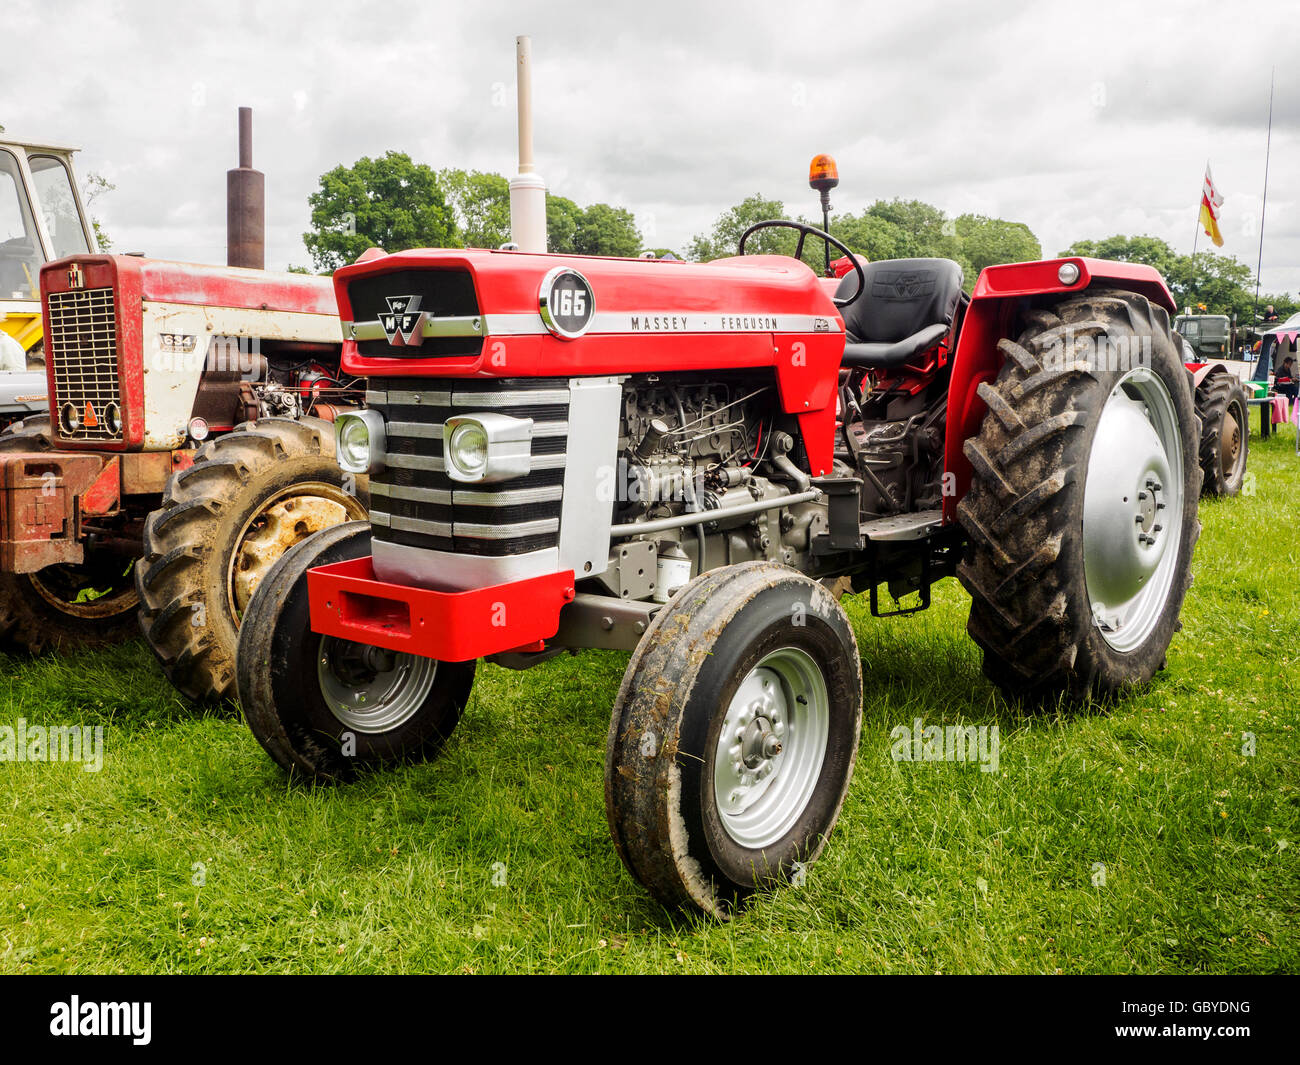 The Famous Massey Ferguson 165 Tractor Still In Demand In Africa Due To Its Ruggedness And Reliability Stock Photo Alamy